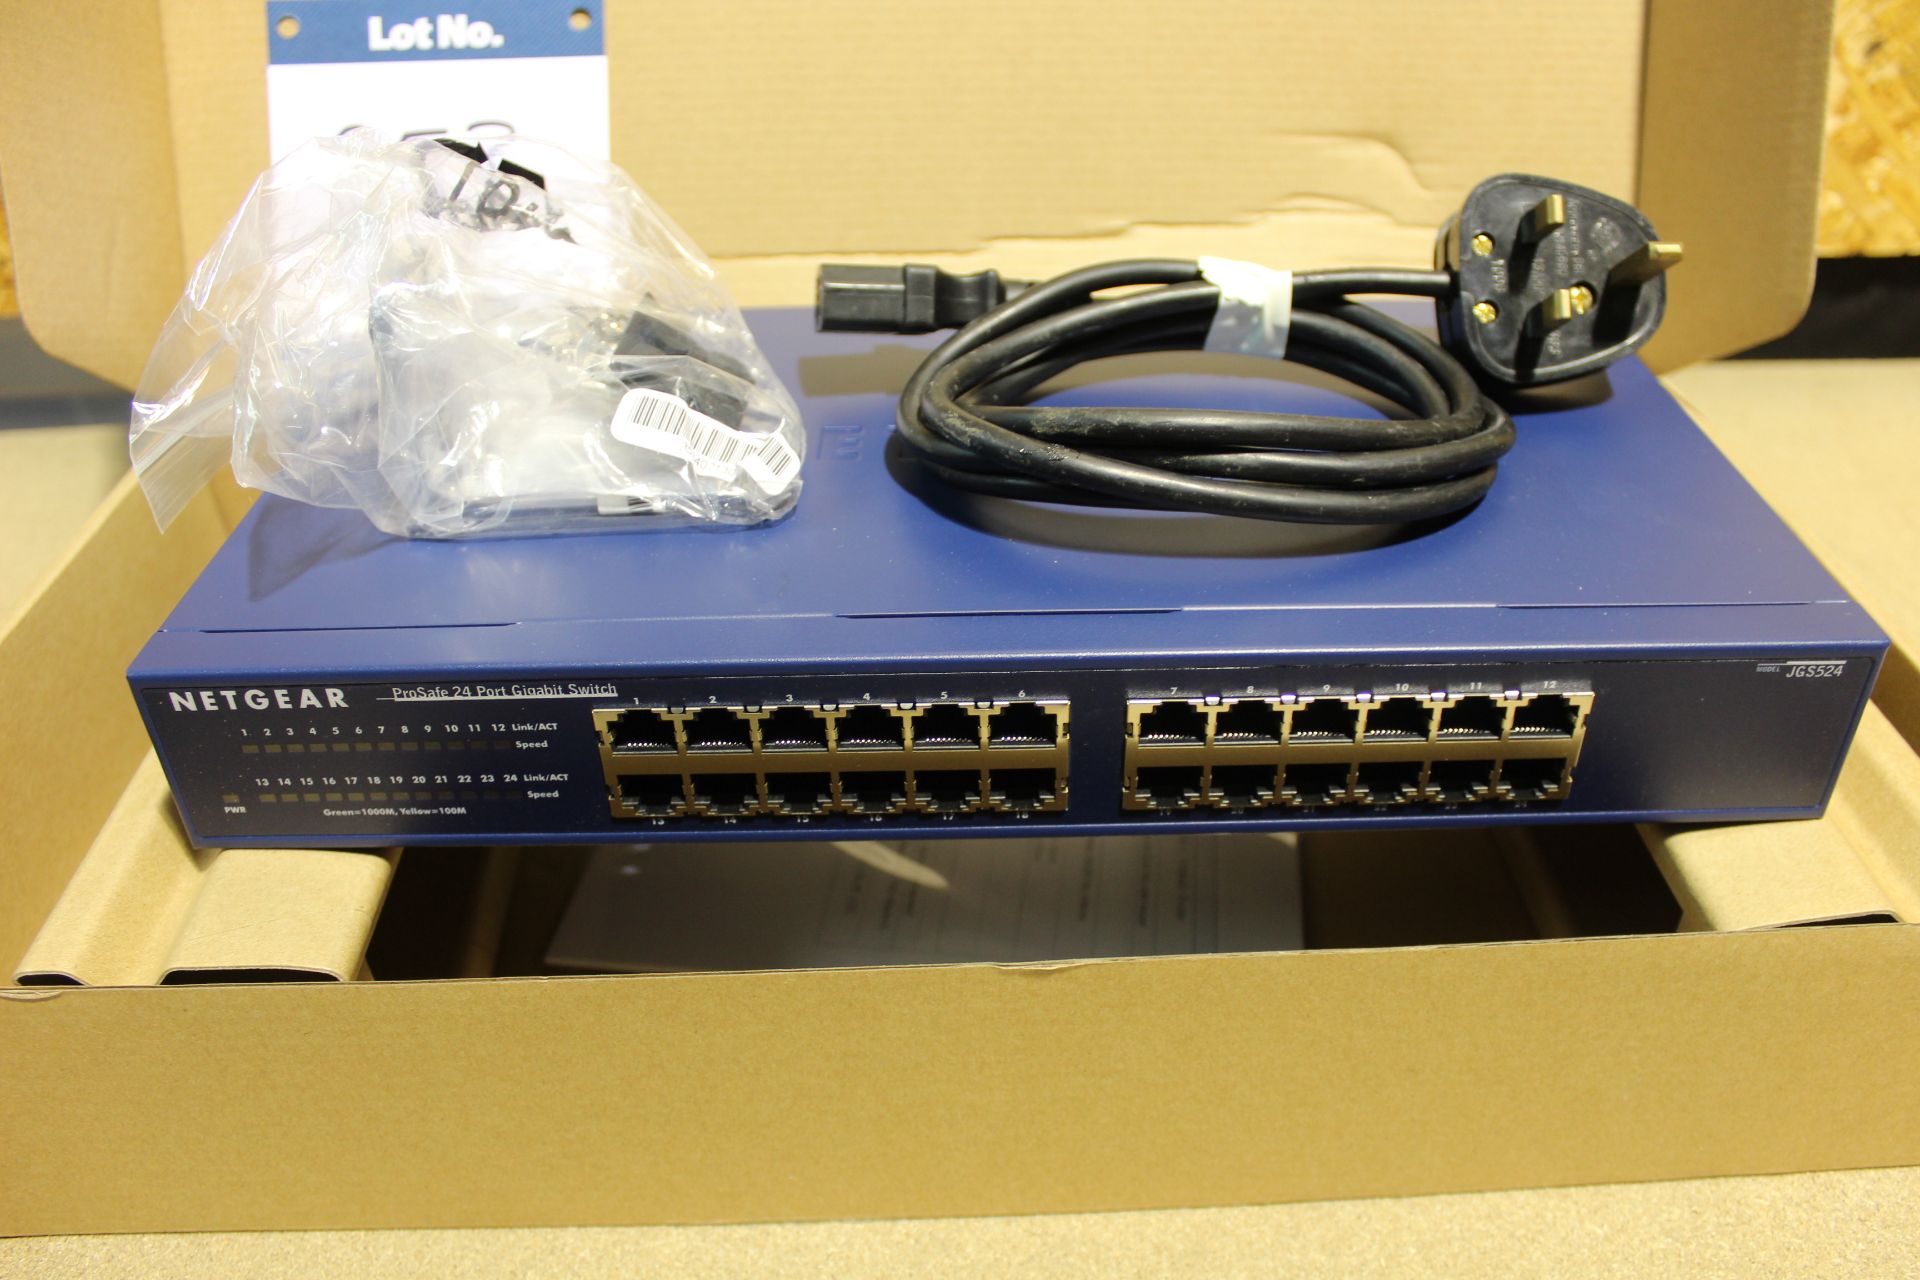 Netgear Prosafe JGS524 v2 24 Port Gigabit Ethernet Switch with 1x IEC in box (Purchased in 2019).